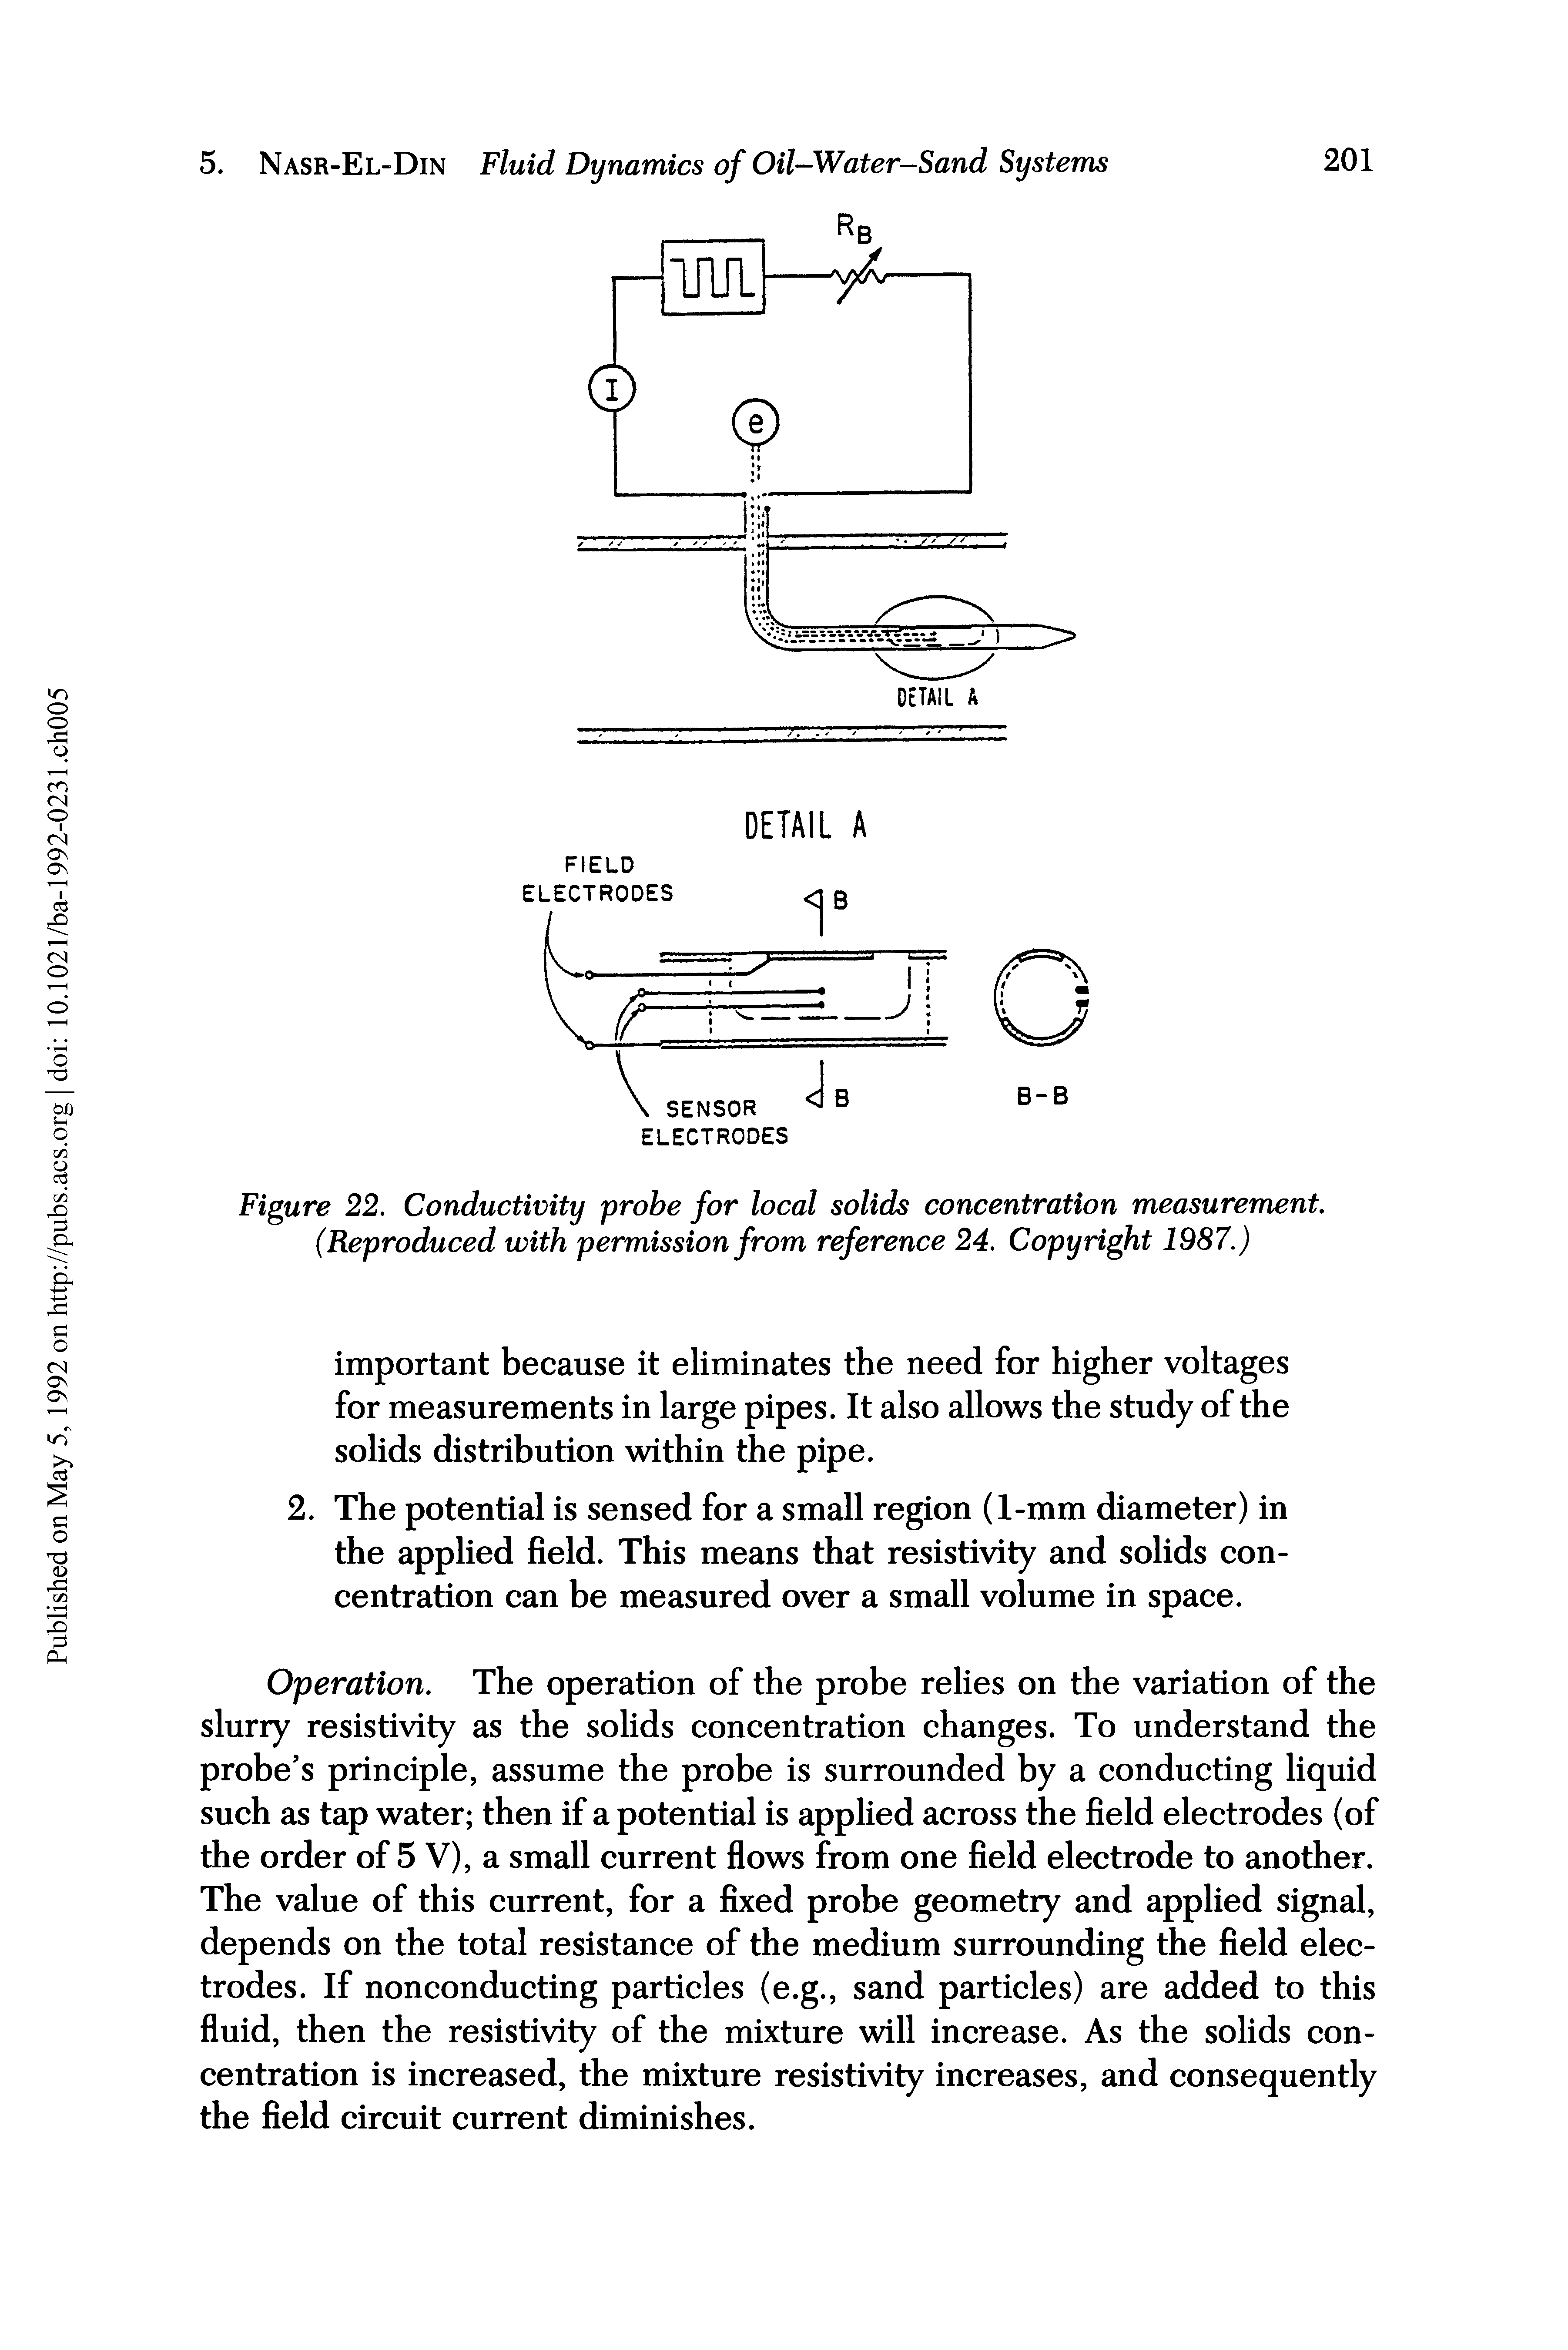 Figure 22. Conductivity probe for local solids concentration measurement (Reproduced with permission from reference 24. Copyright 1987.)...